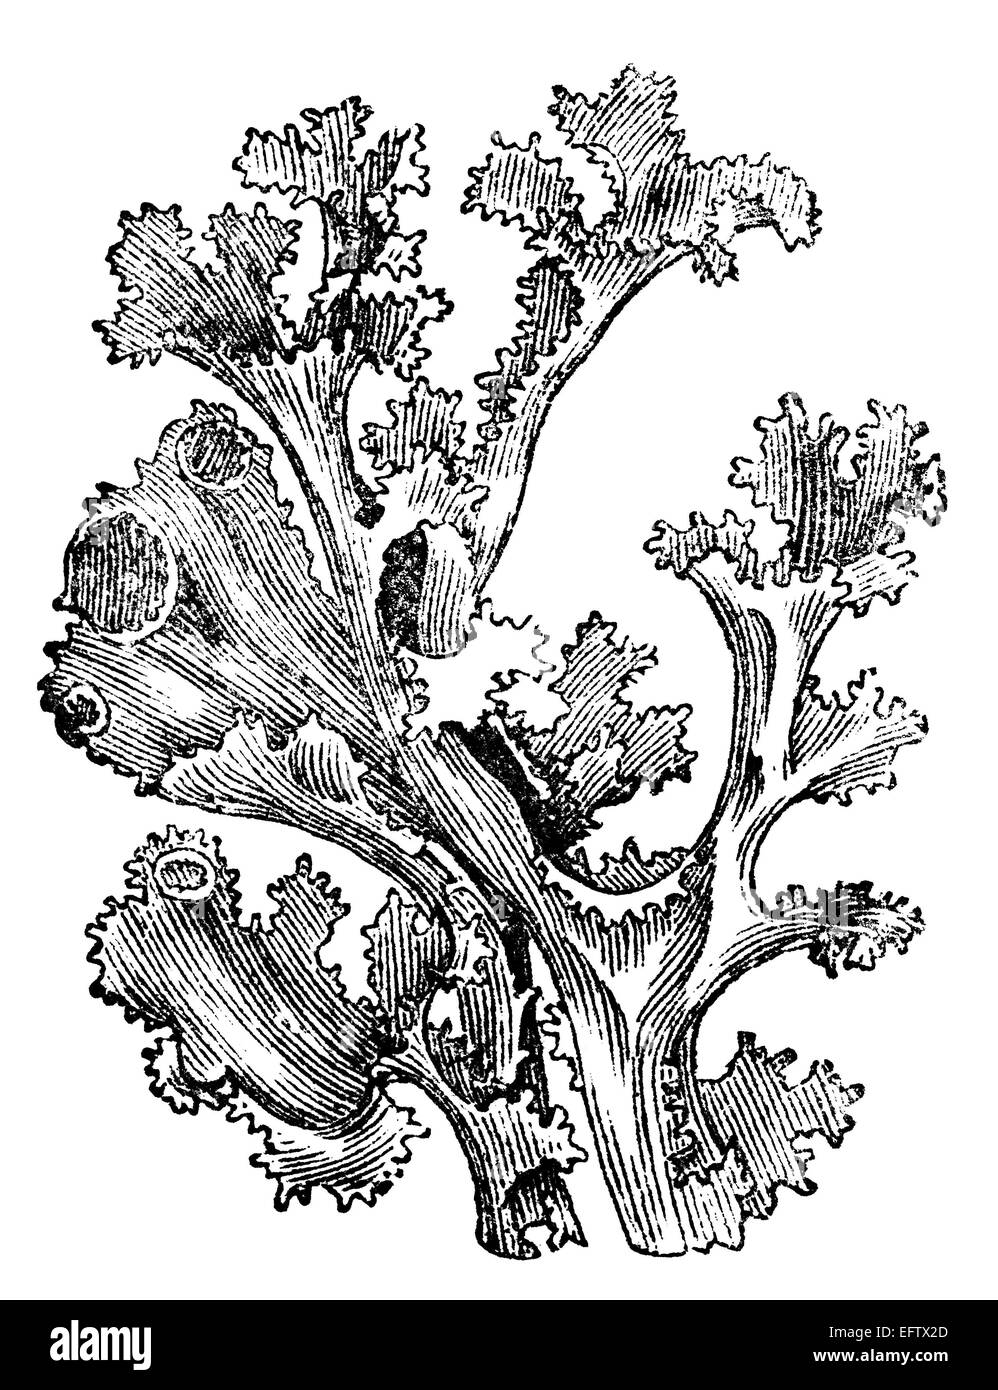 Victorian engraving of Iceland moss. Digitally restored image from a mid-19th century Encyclopaedia. Stock Photo